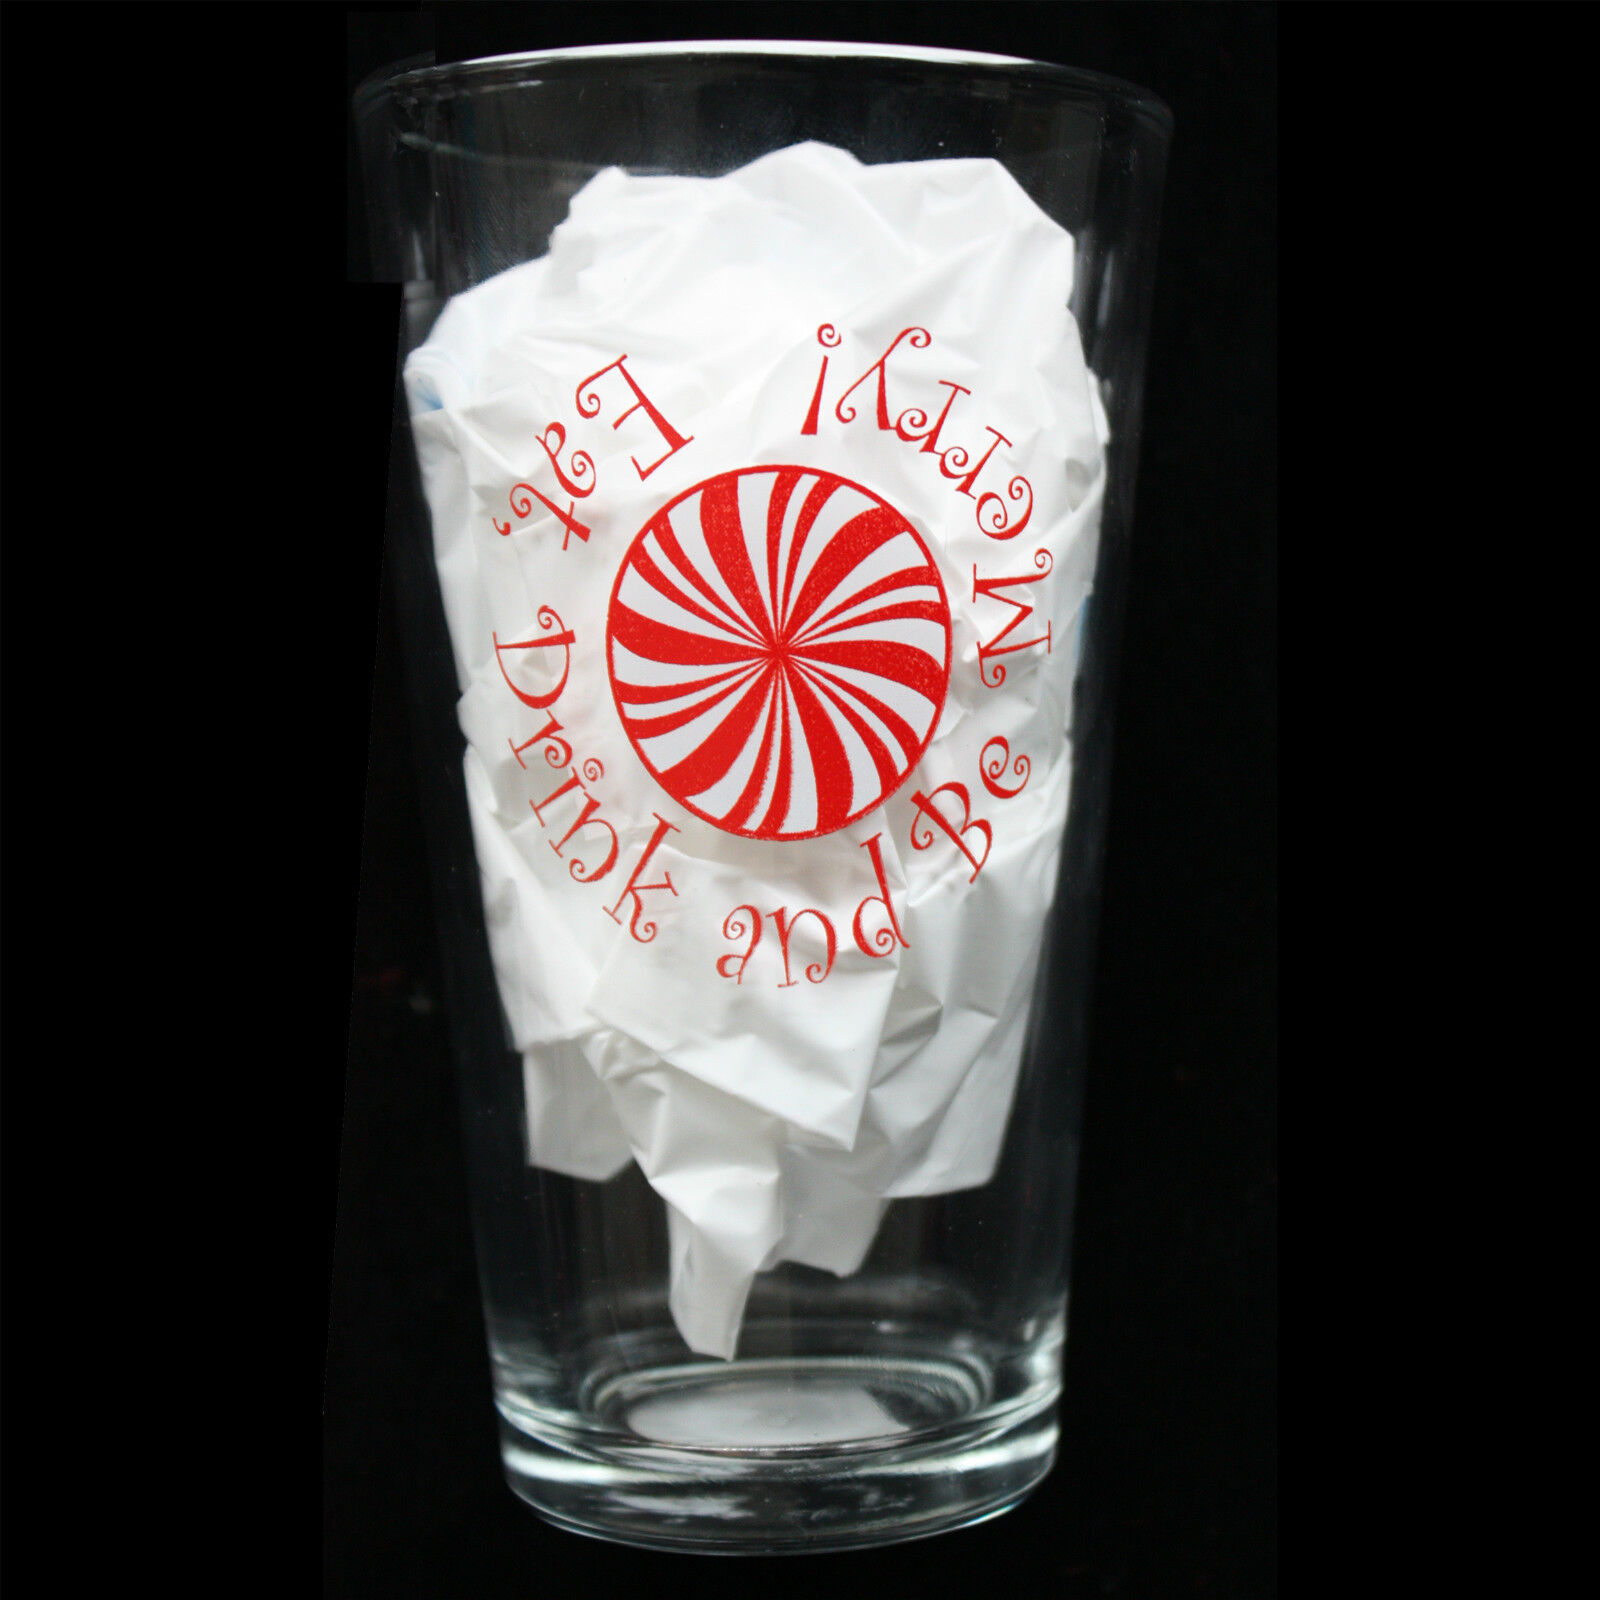 Peppermint Candy EAT DRINK BE MERRY Beer Pint Glass Holiday Party Bar Decoration